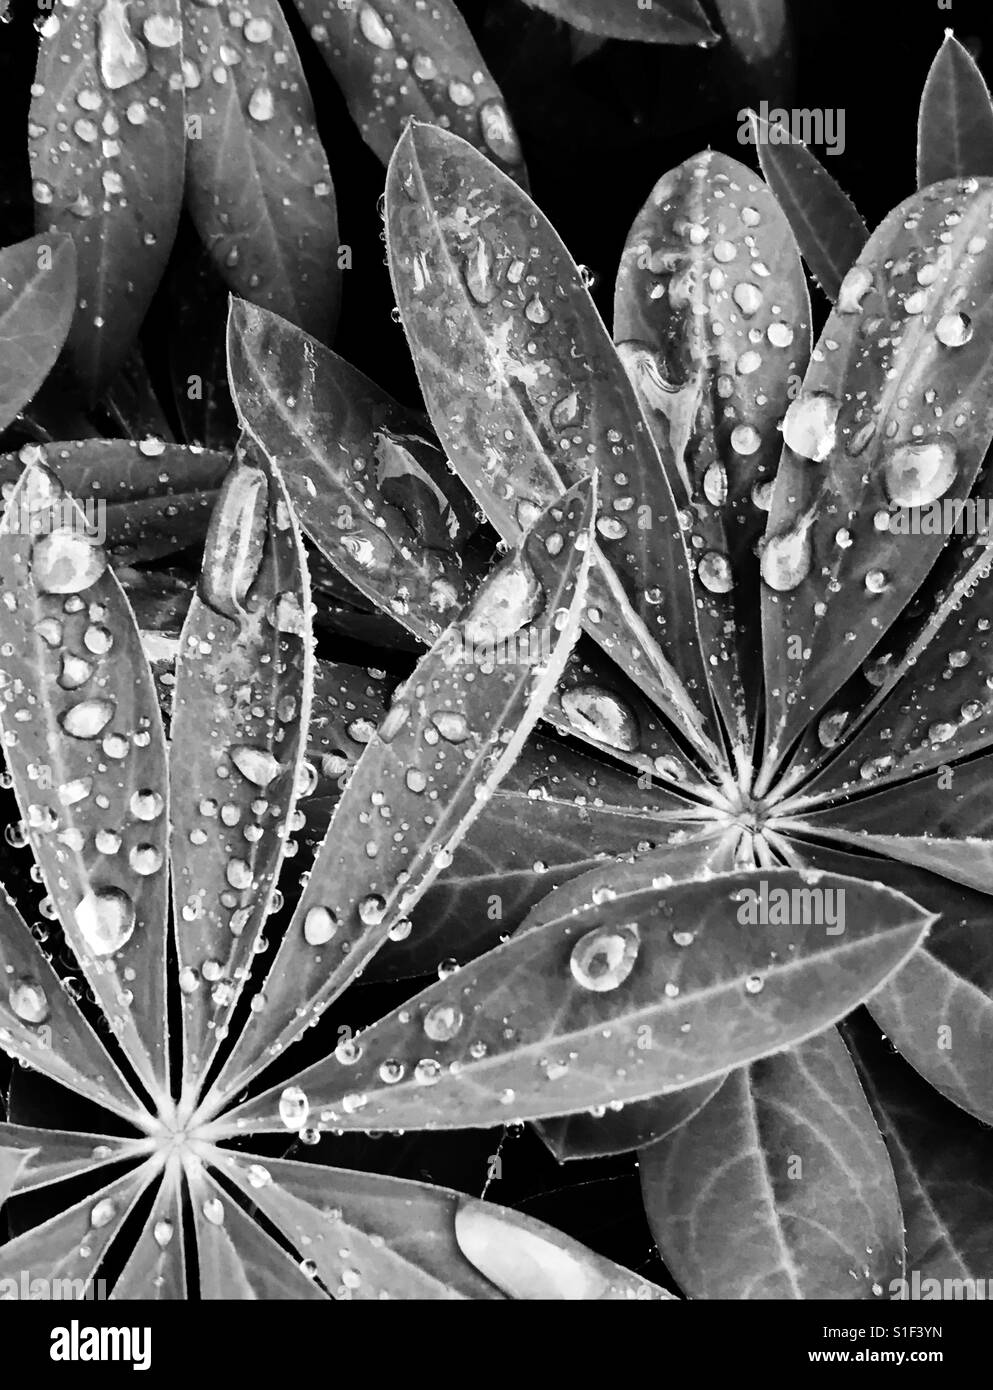 Black And White Close Up Water Drops On Plant Stock Photo Alamy